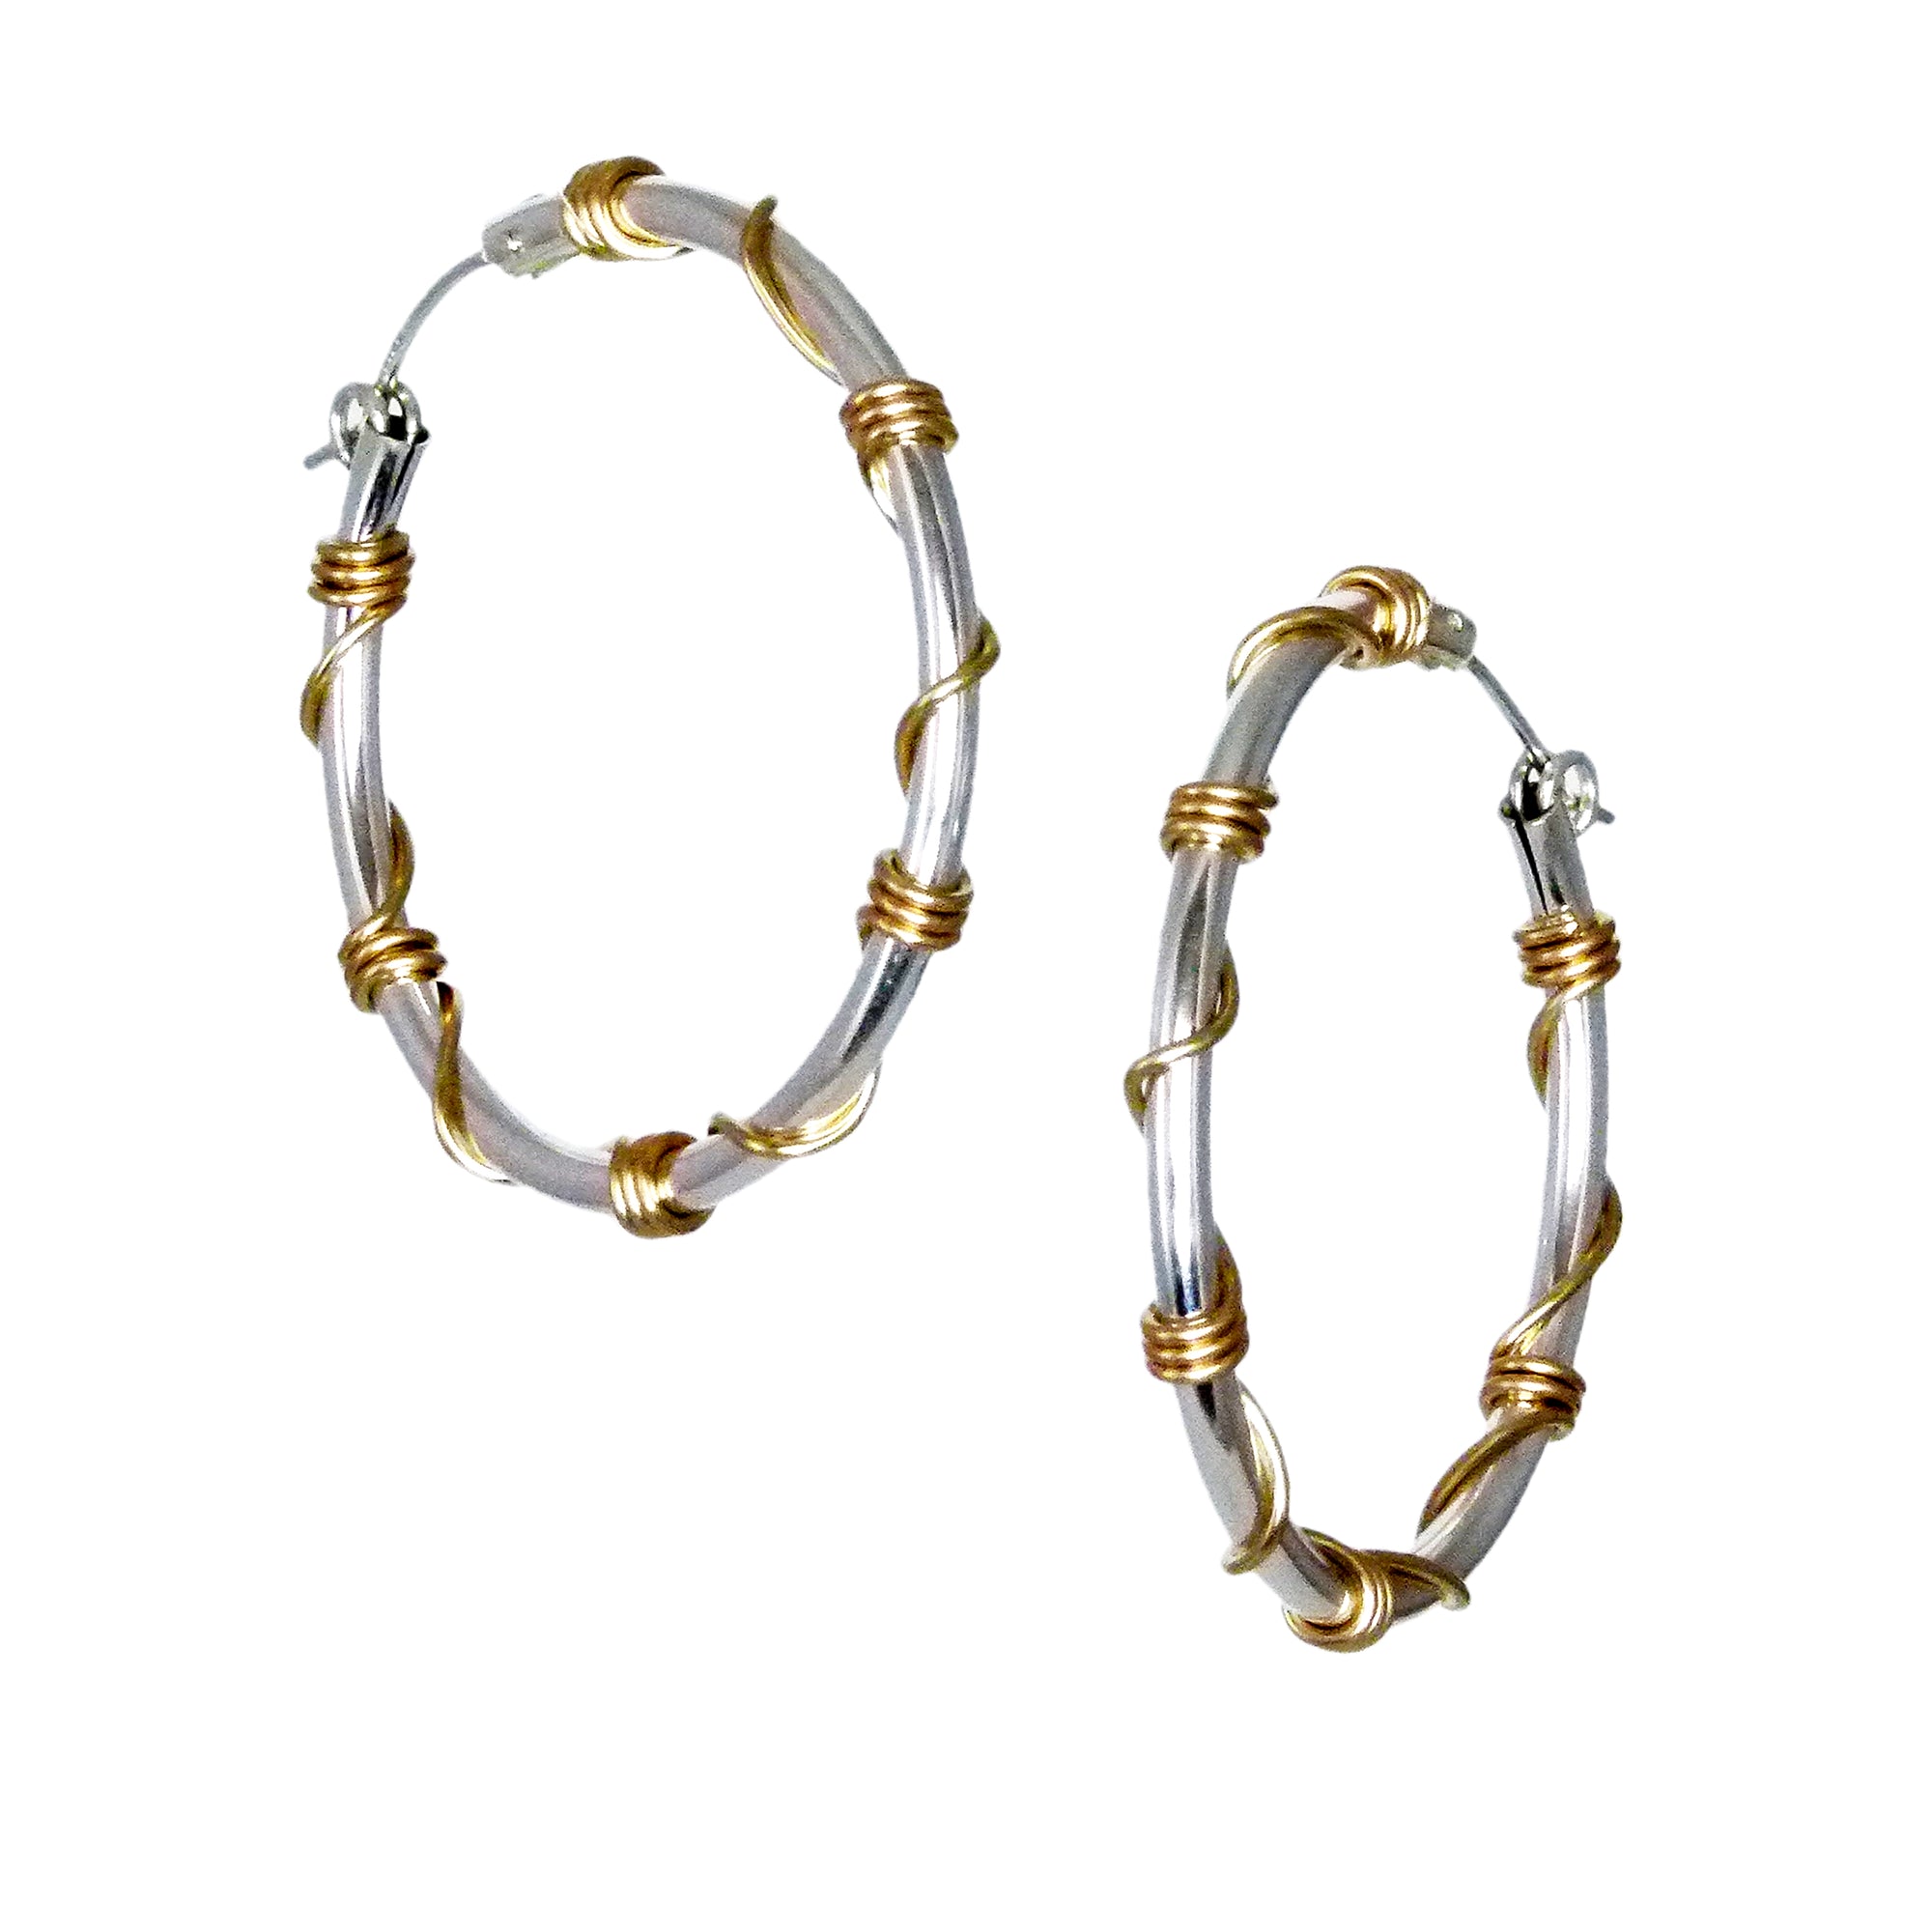 Unique Hoop Earrings - Silver and Gold Wrapped